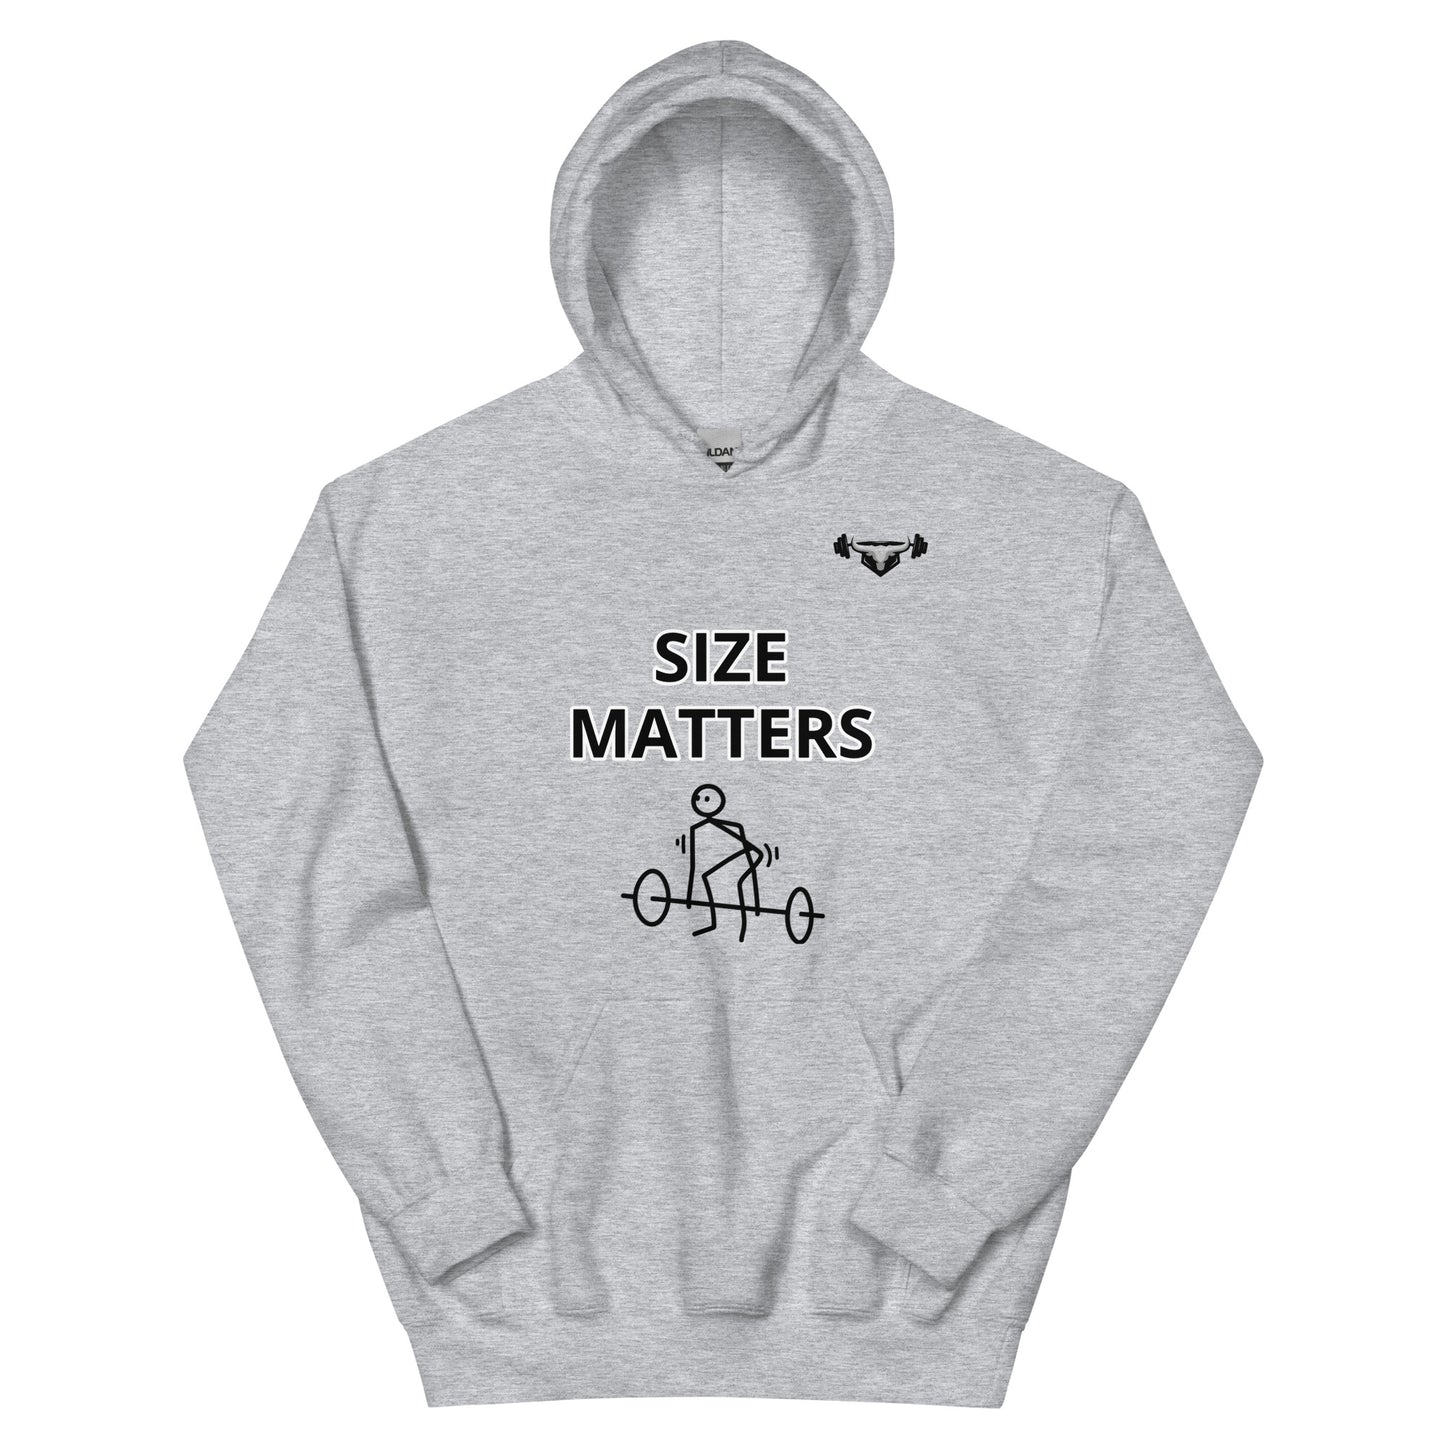 SIZE MATTERS HOODIE